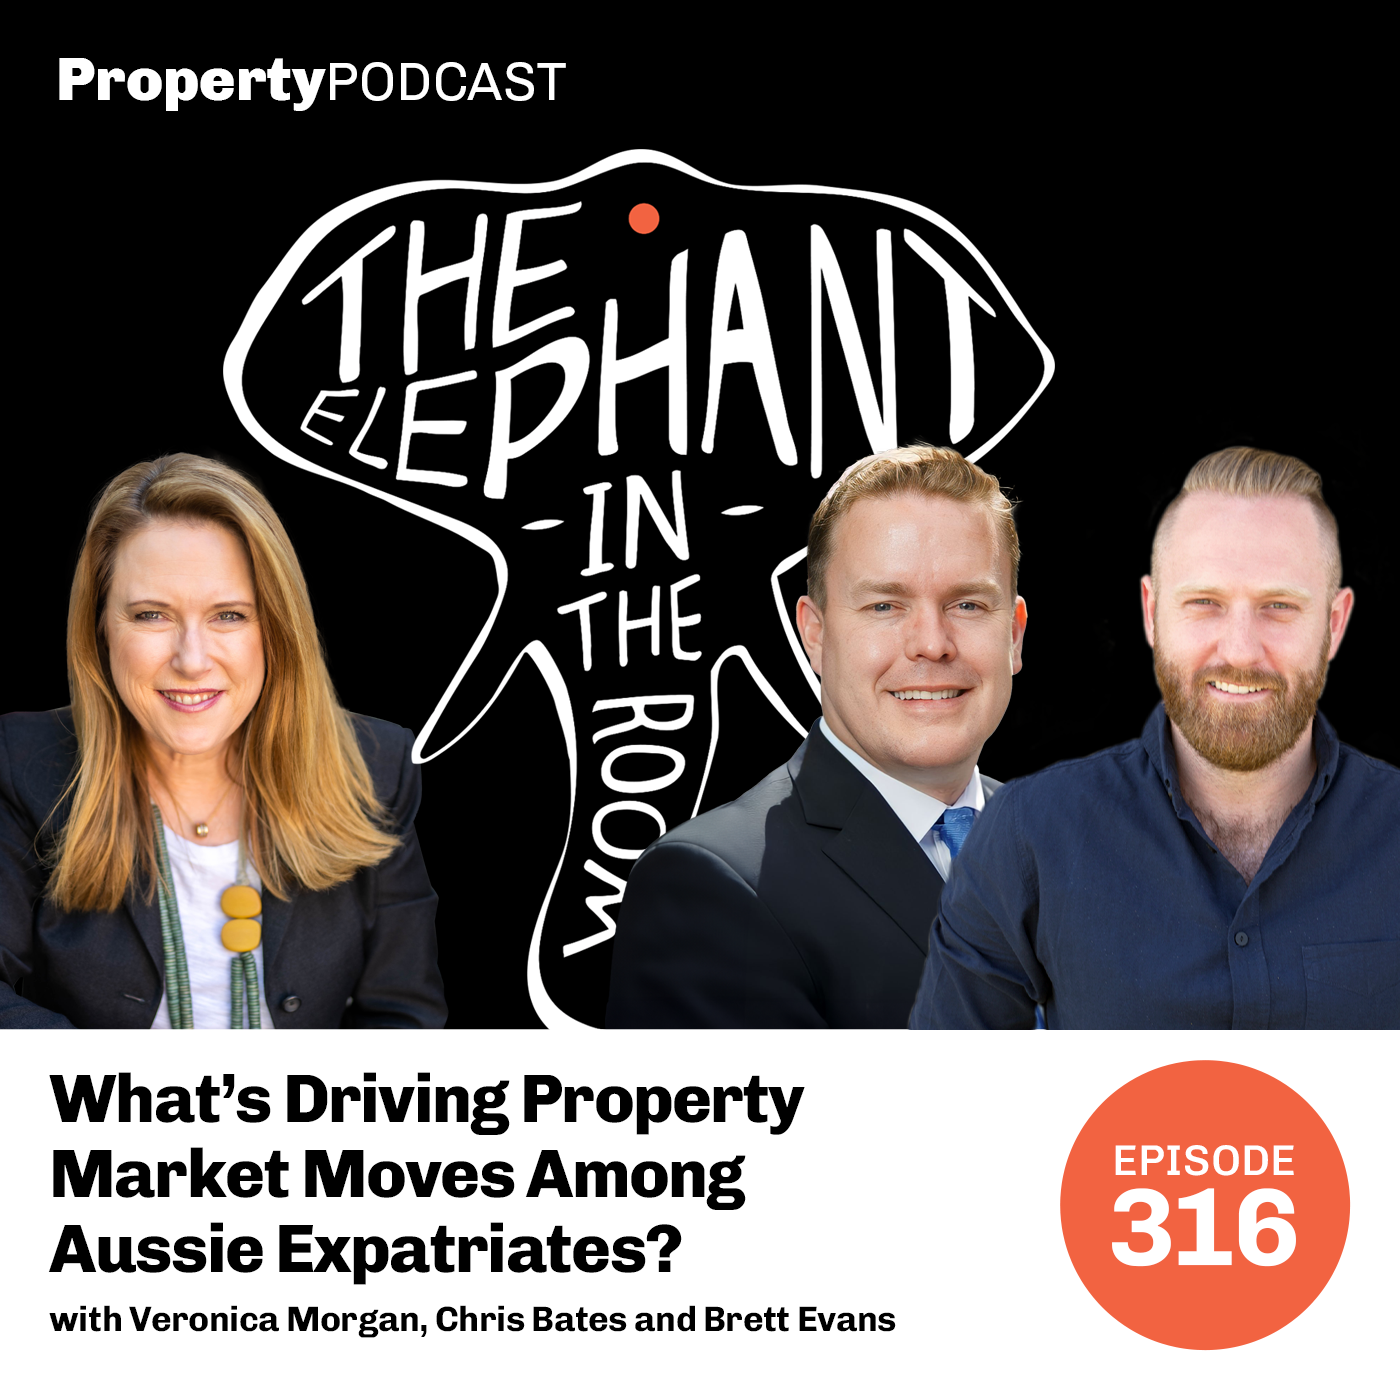 What’s Driving Property Market Moves Among Aussie Expatriates?